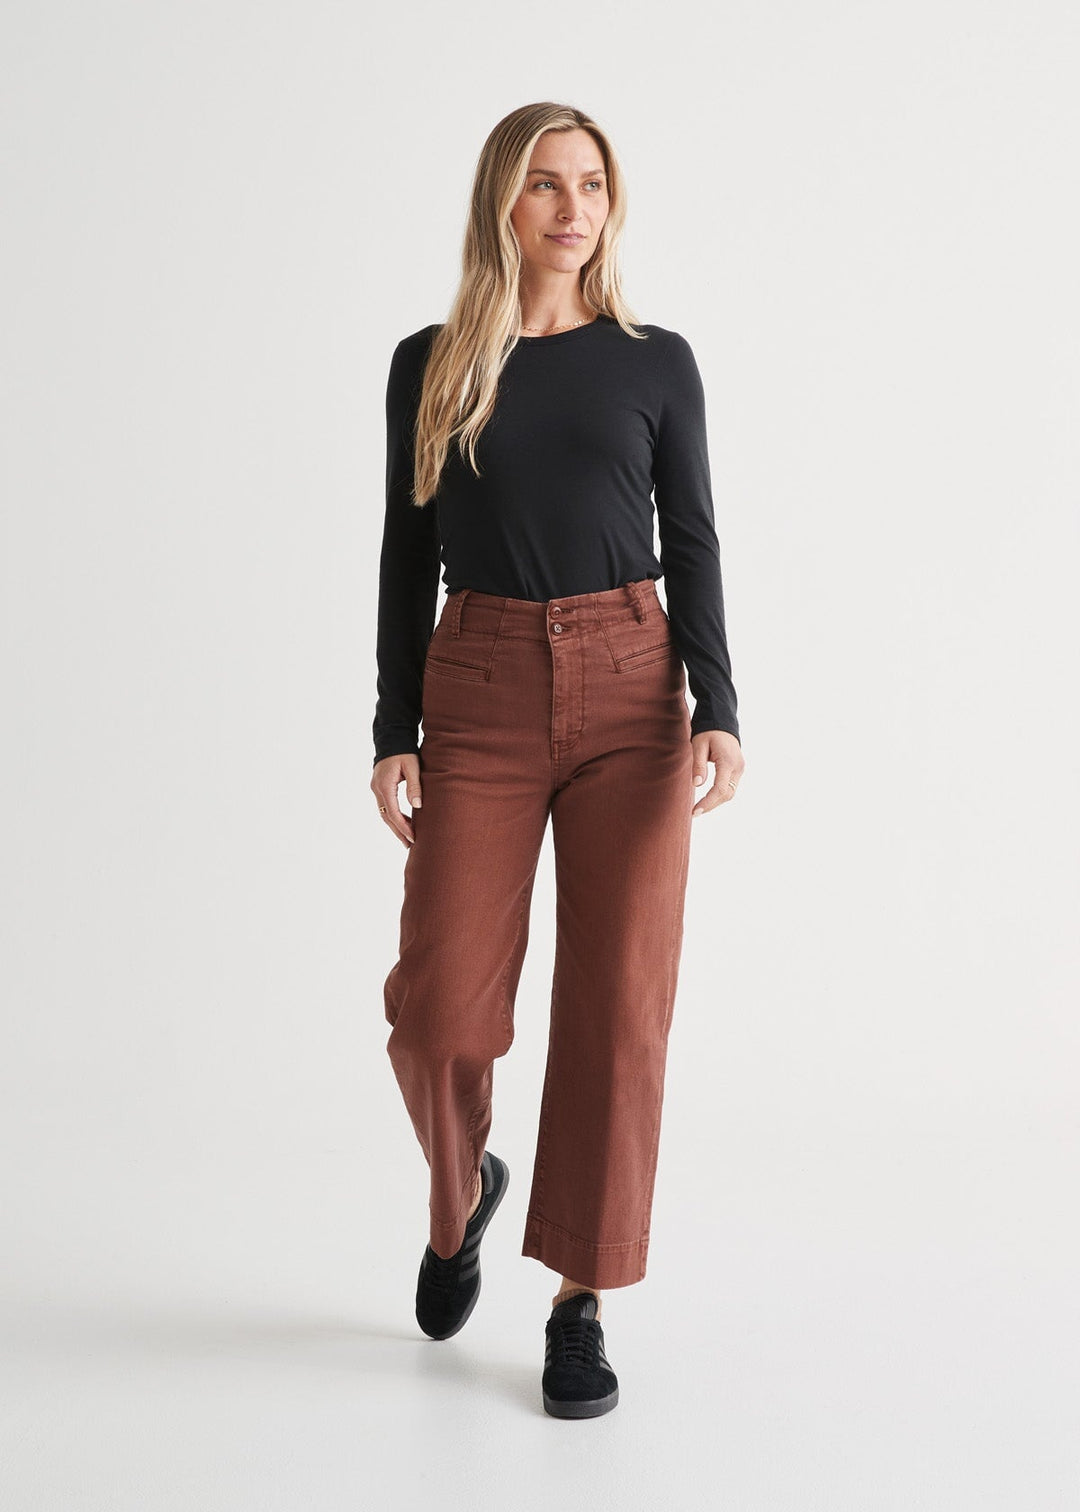 High Waist Stretchy Skinny Jeans With Side Pockets And Washed Denim Pencil Trouser  Jeans For Women For Women Streetwear Style 210322 From Bai04, $21.27